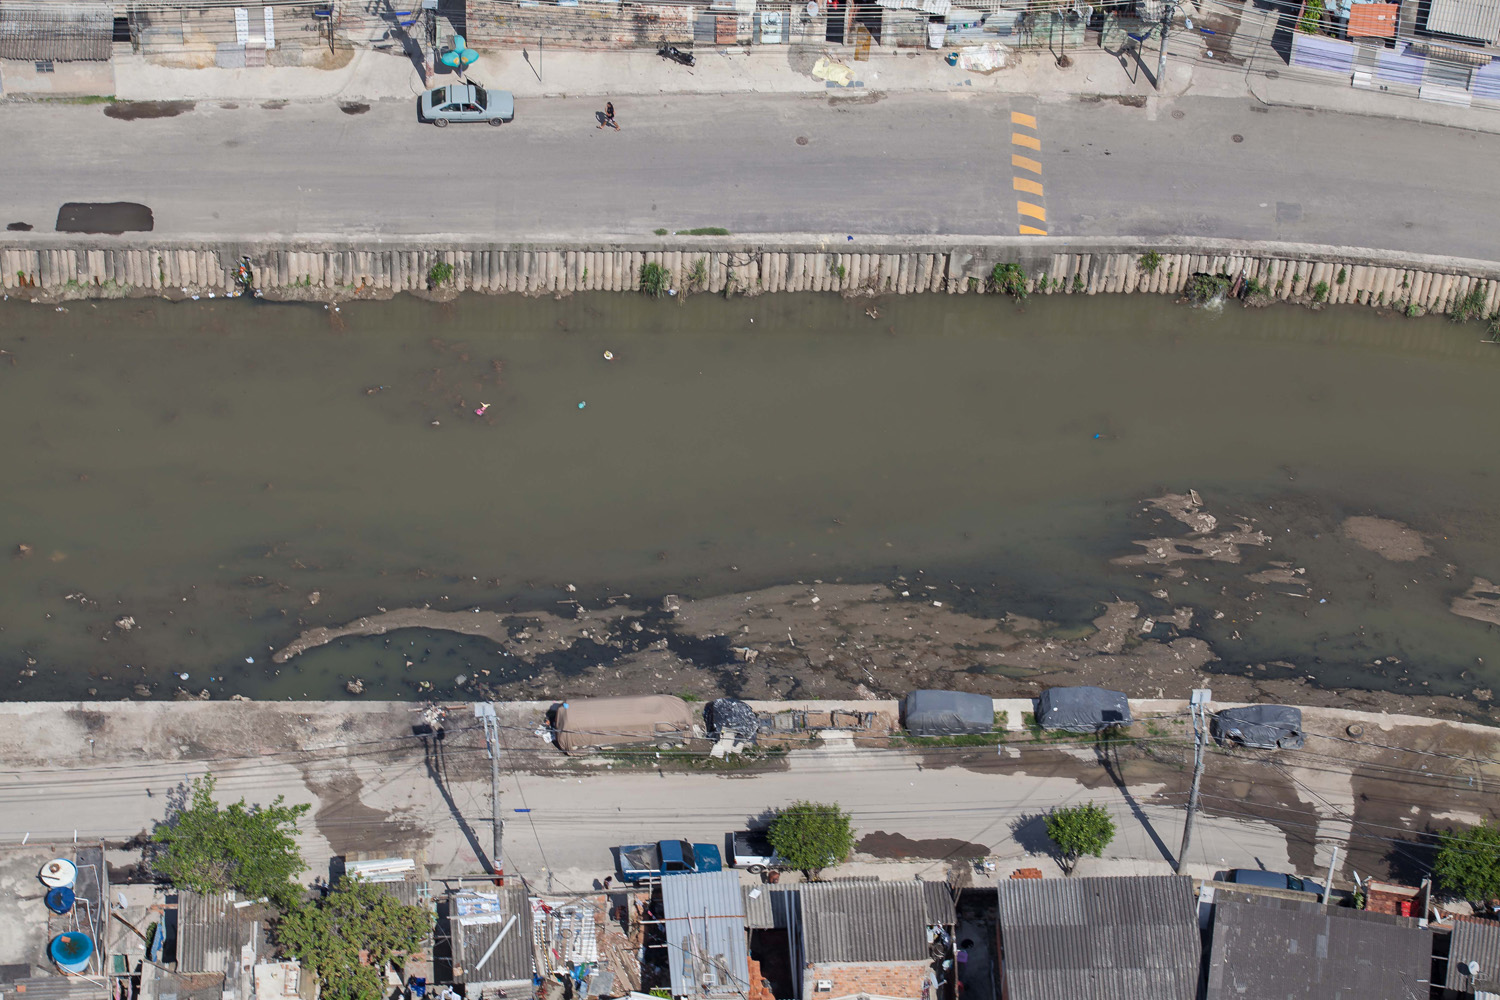 Rio’s Olympic Site Looks Even Worse From The Air